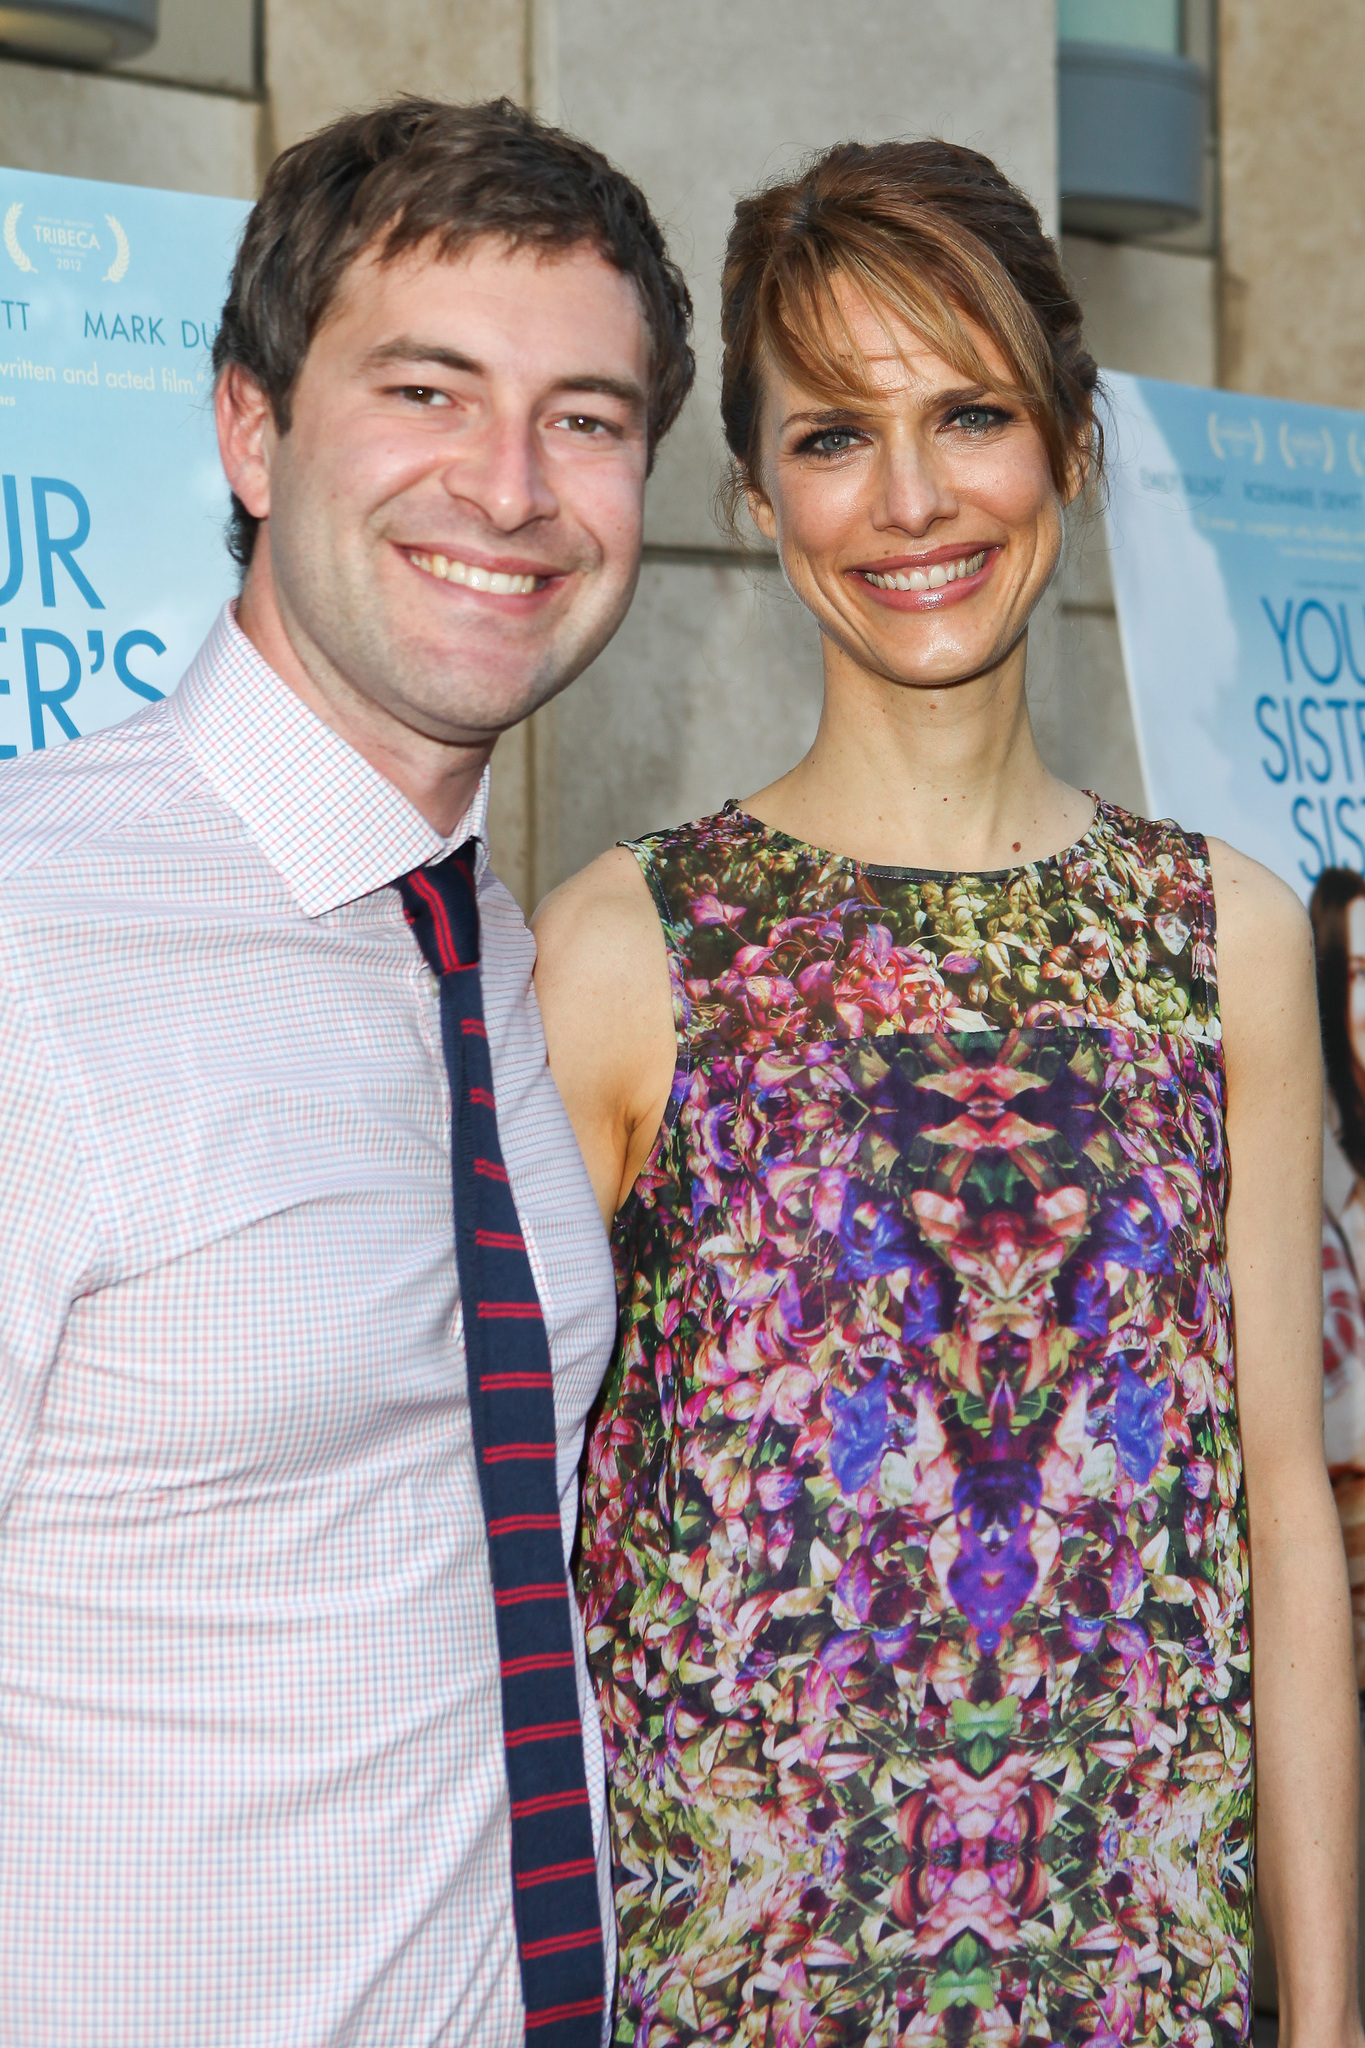 Mark Duplass and Lynn Shelton at an event for Your Sister's Sister (2011)